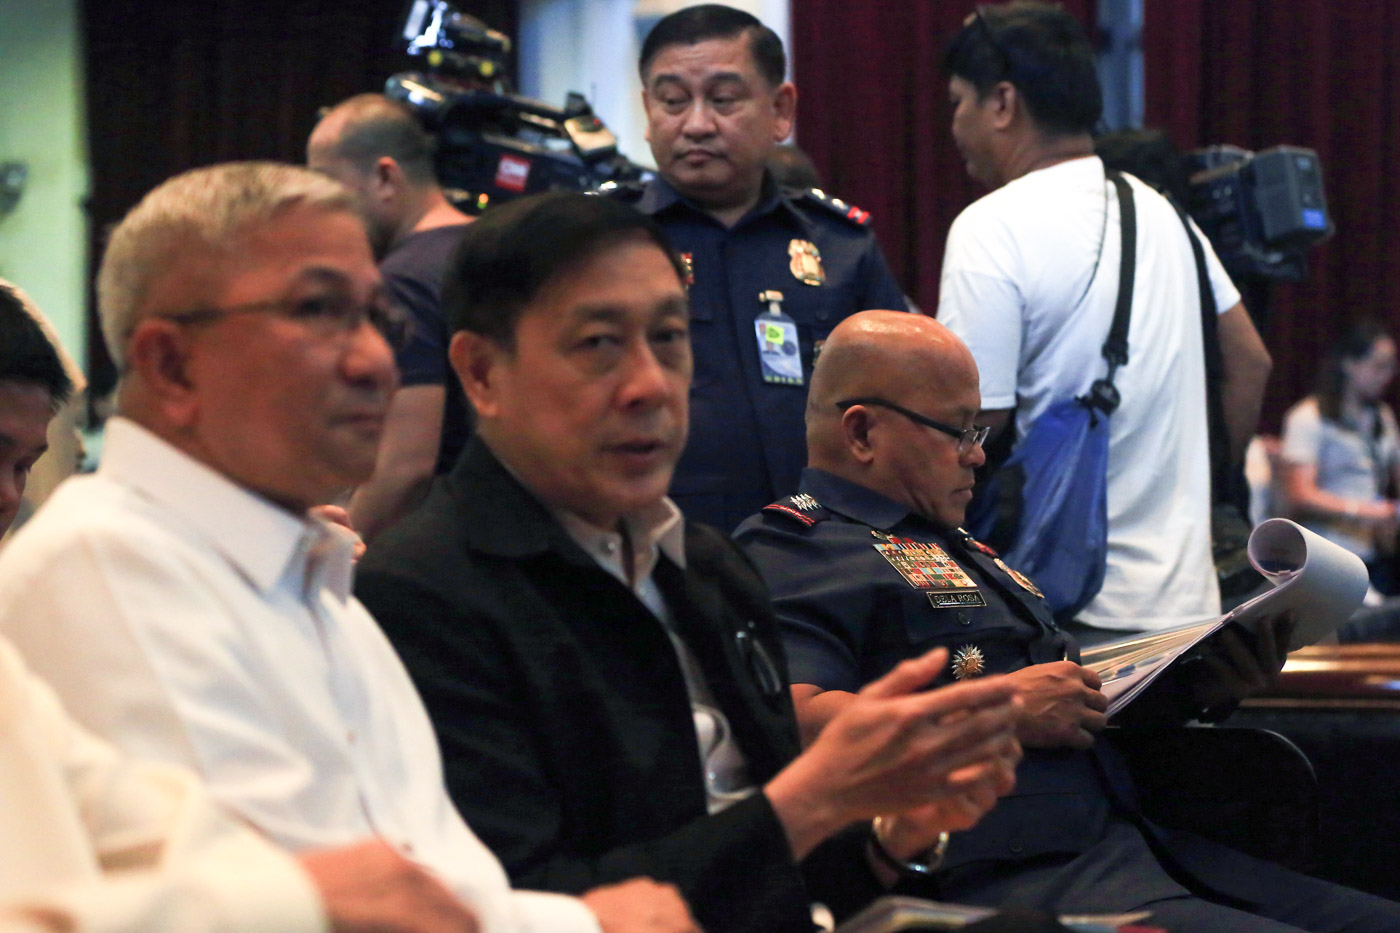 RESOURCE PERSONS. PDEA Chief General Aaron Aquino (in white) and PNP Chief General Ronald "Bato" dela Rosa are invited as resource persons during the oral arguments on November 28, 2017. Photo by Ben Nabong/Rappler  